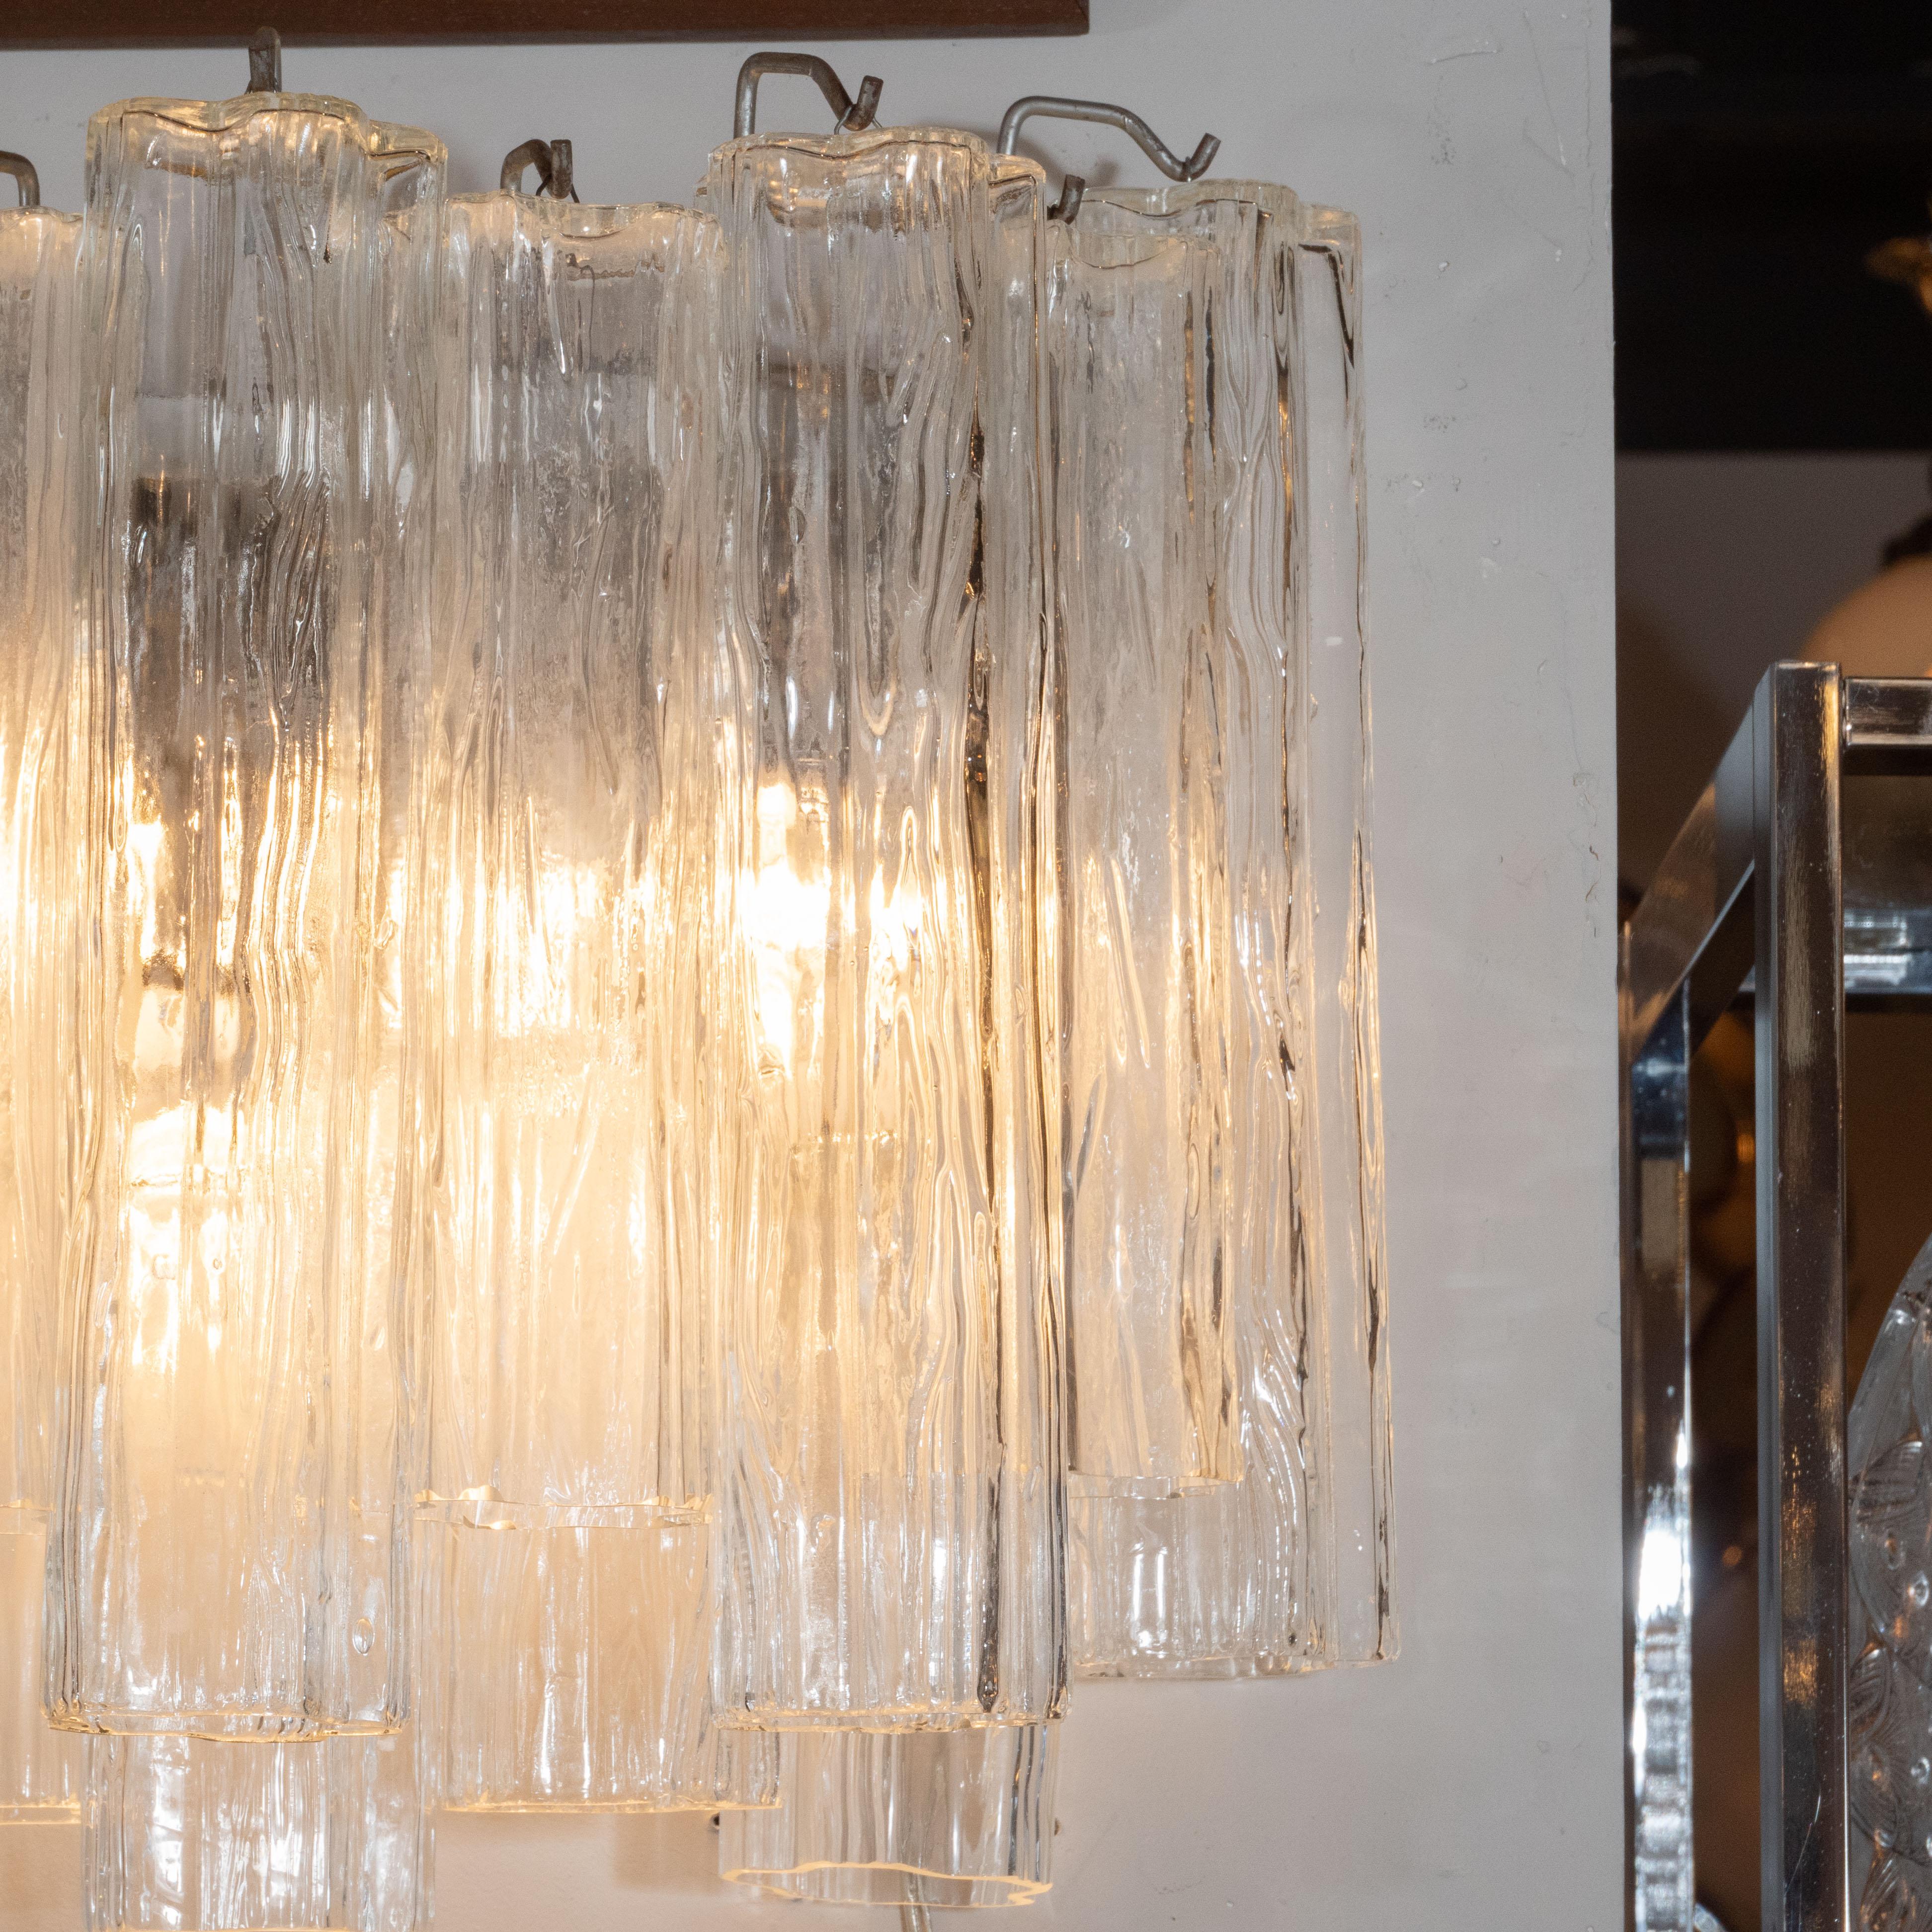 Late 20th Century Mid-Century Modern Translucent Glass Tronchi Sconces with Nickel Fittings